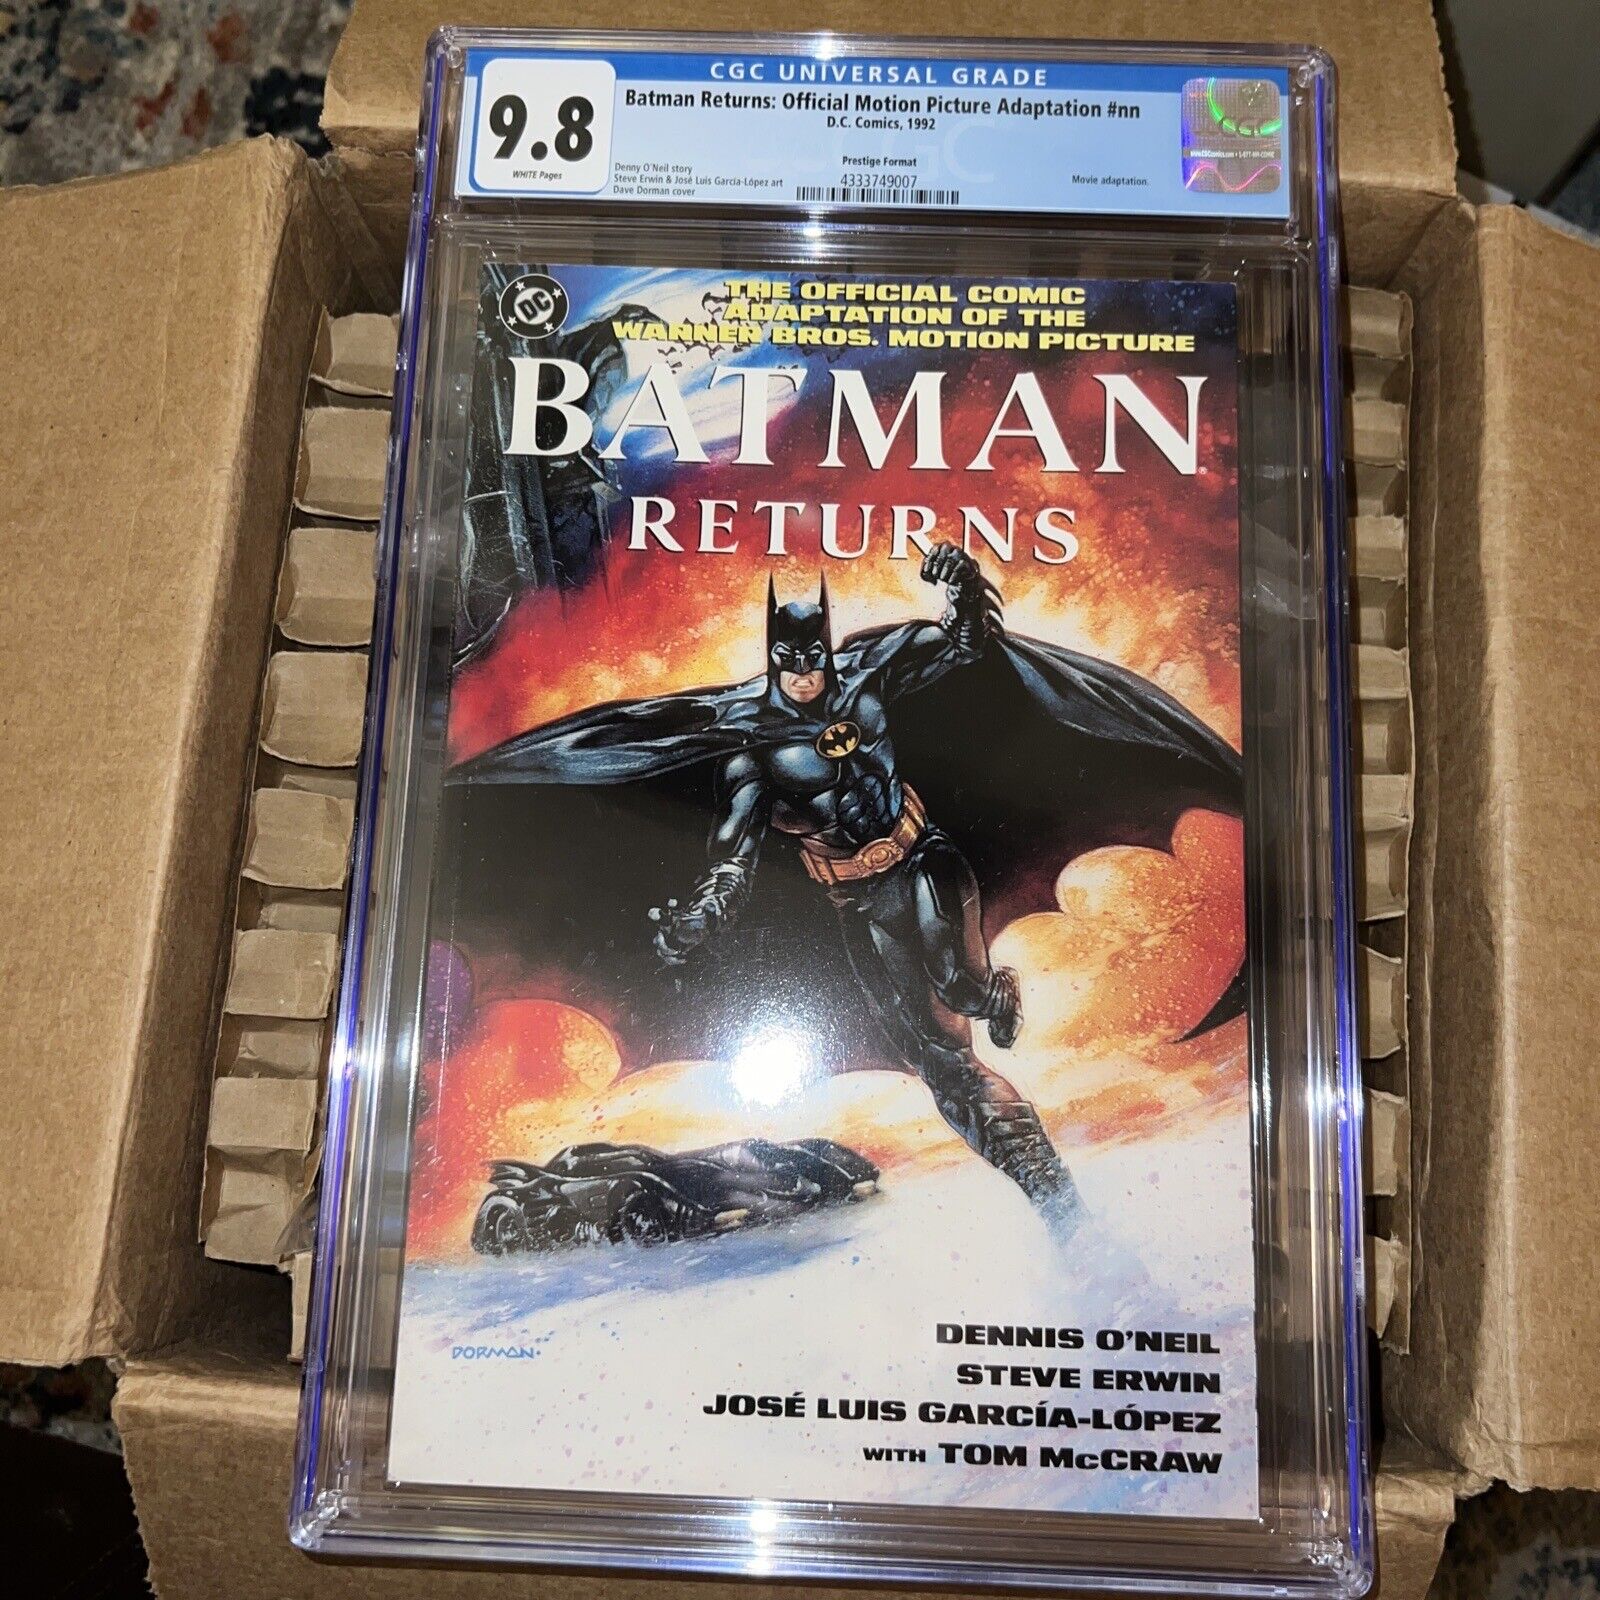 Batman Returns: Official Motion Picture Adaptation [nn] [Deluxe] CGC 9.8 | NM/MT